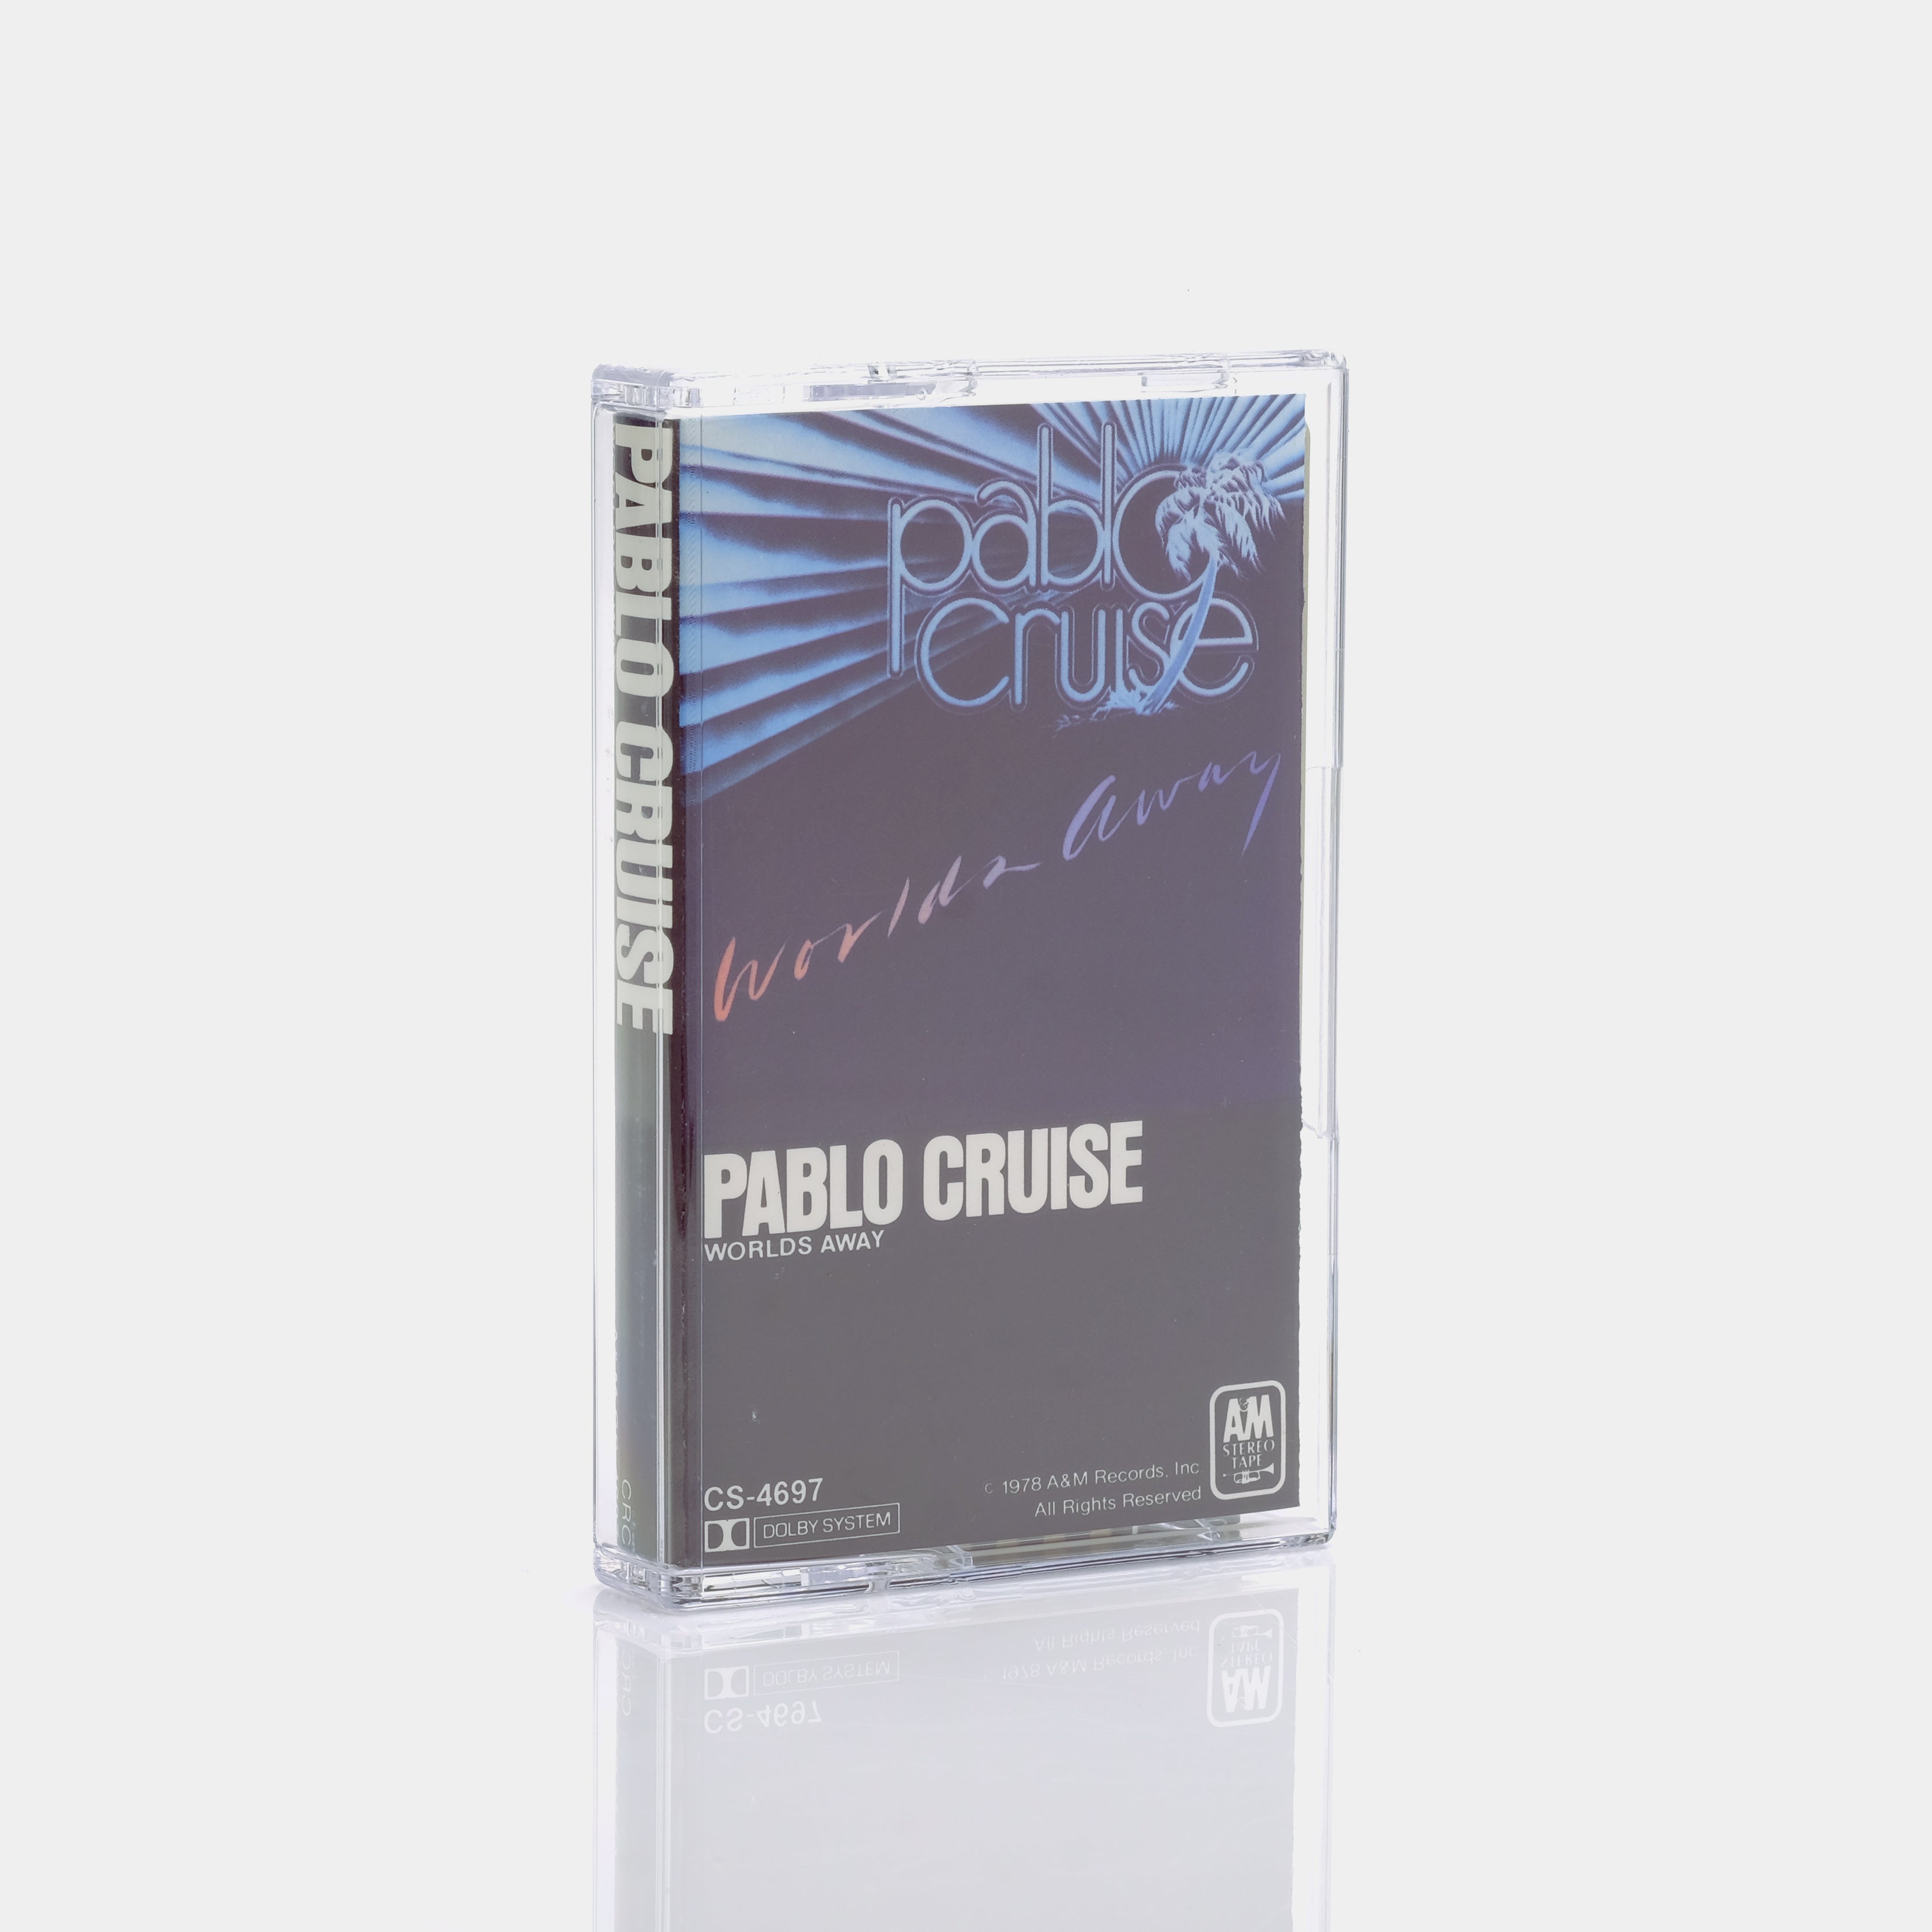 Pablo Cruise - Worlds Away Cassette Tape